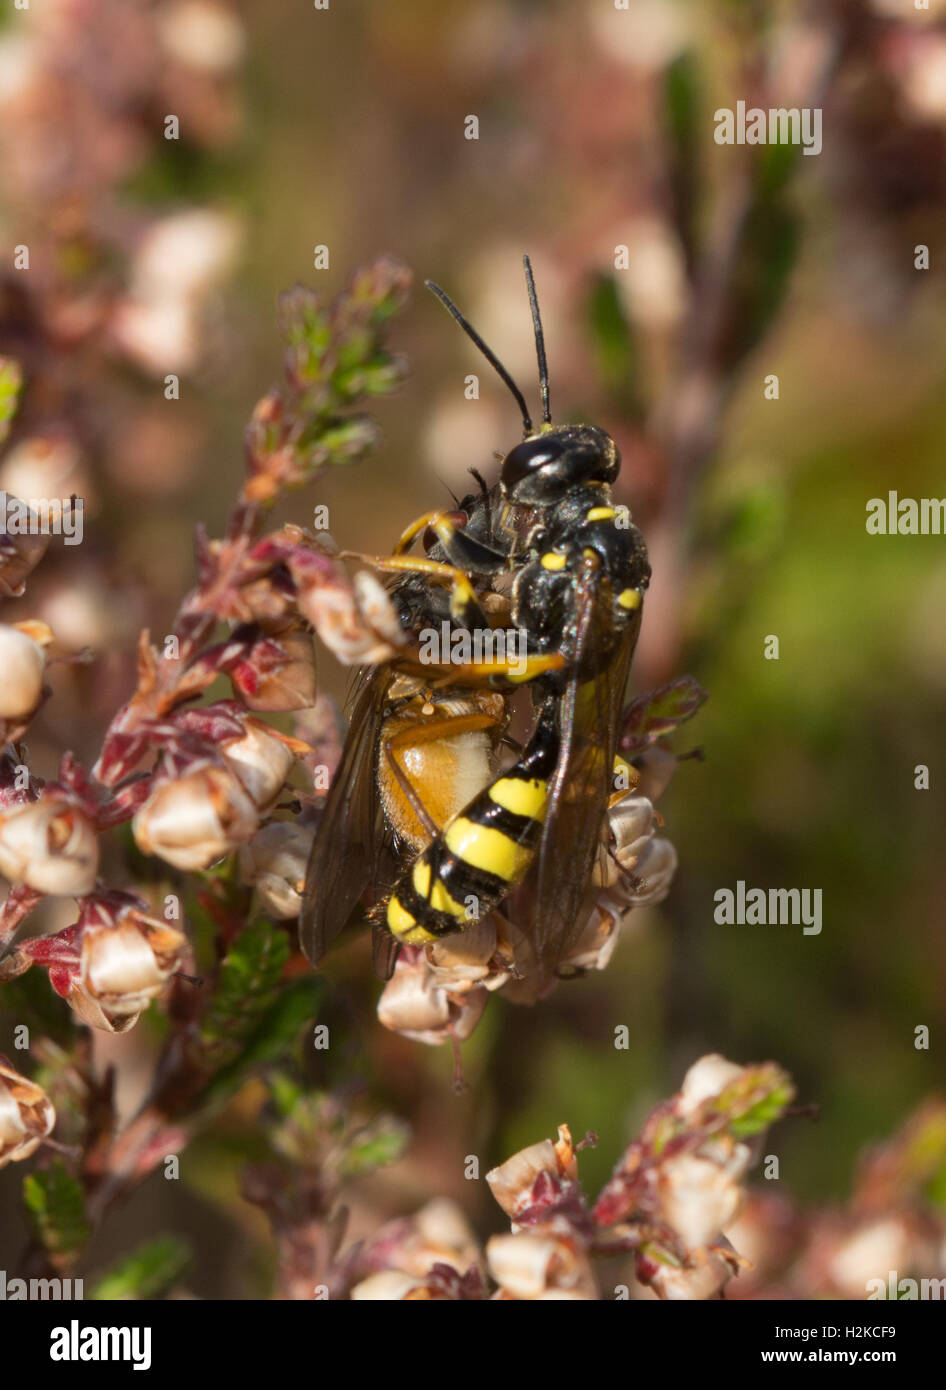 Beewolf wasp (genus Philanthus) catching insect prey on heather in Surrey, England Stock Photo